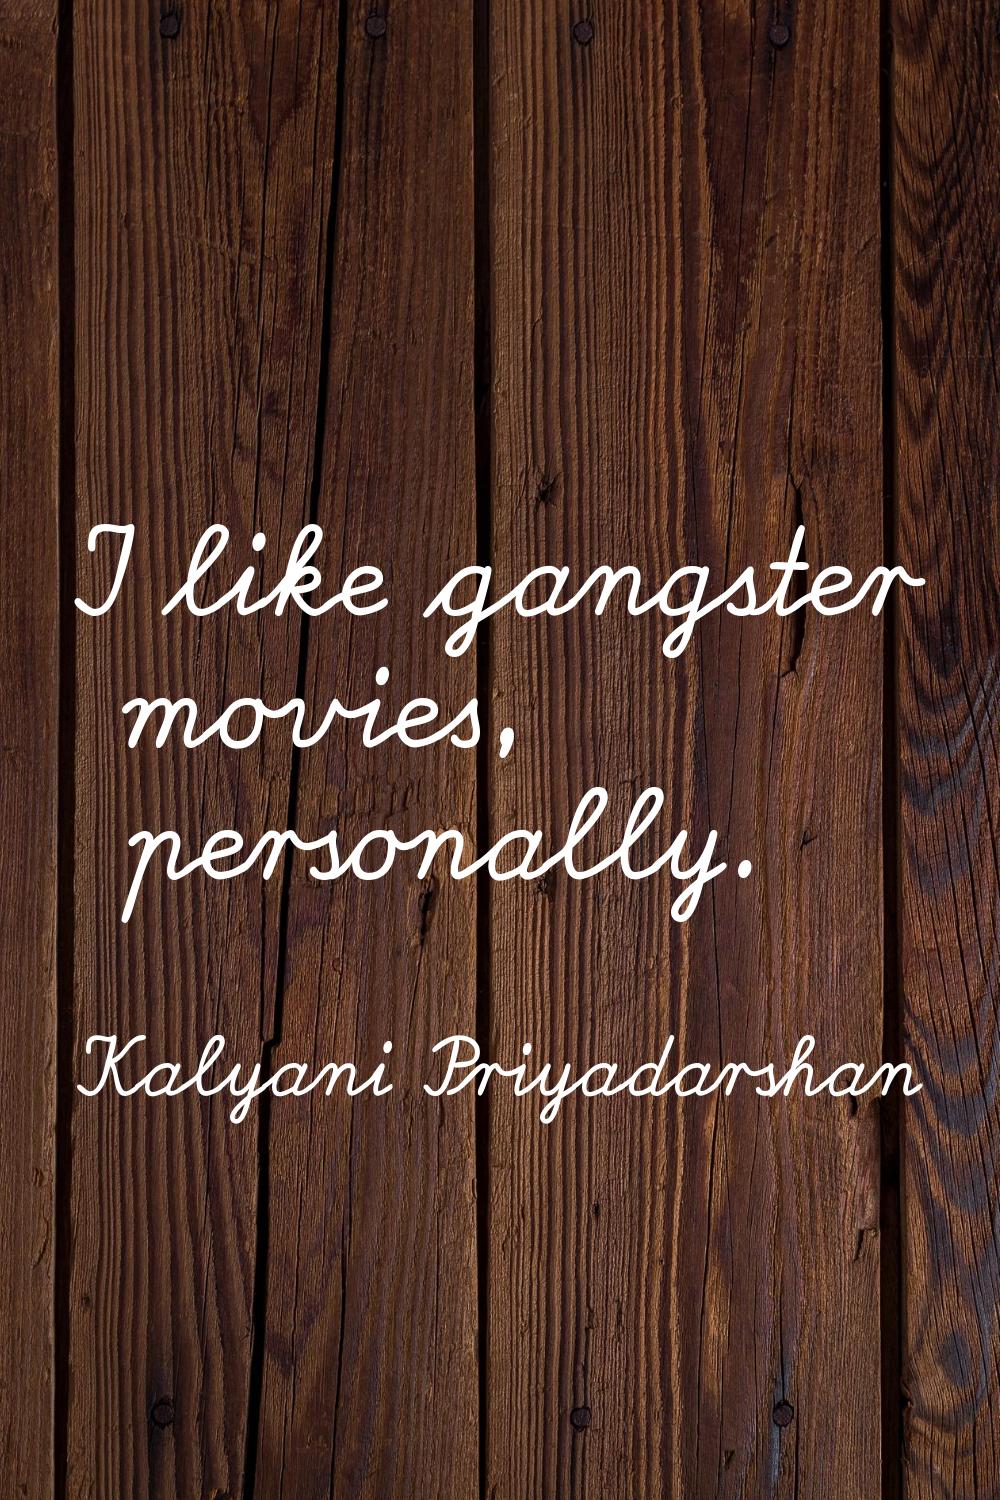 I like gangster movies, personally.